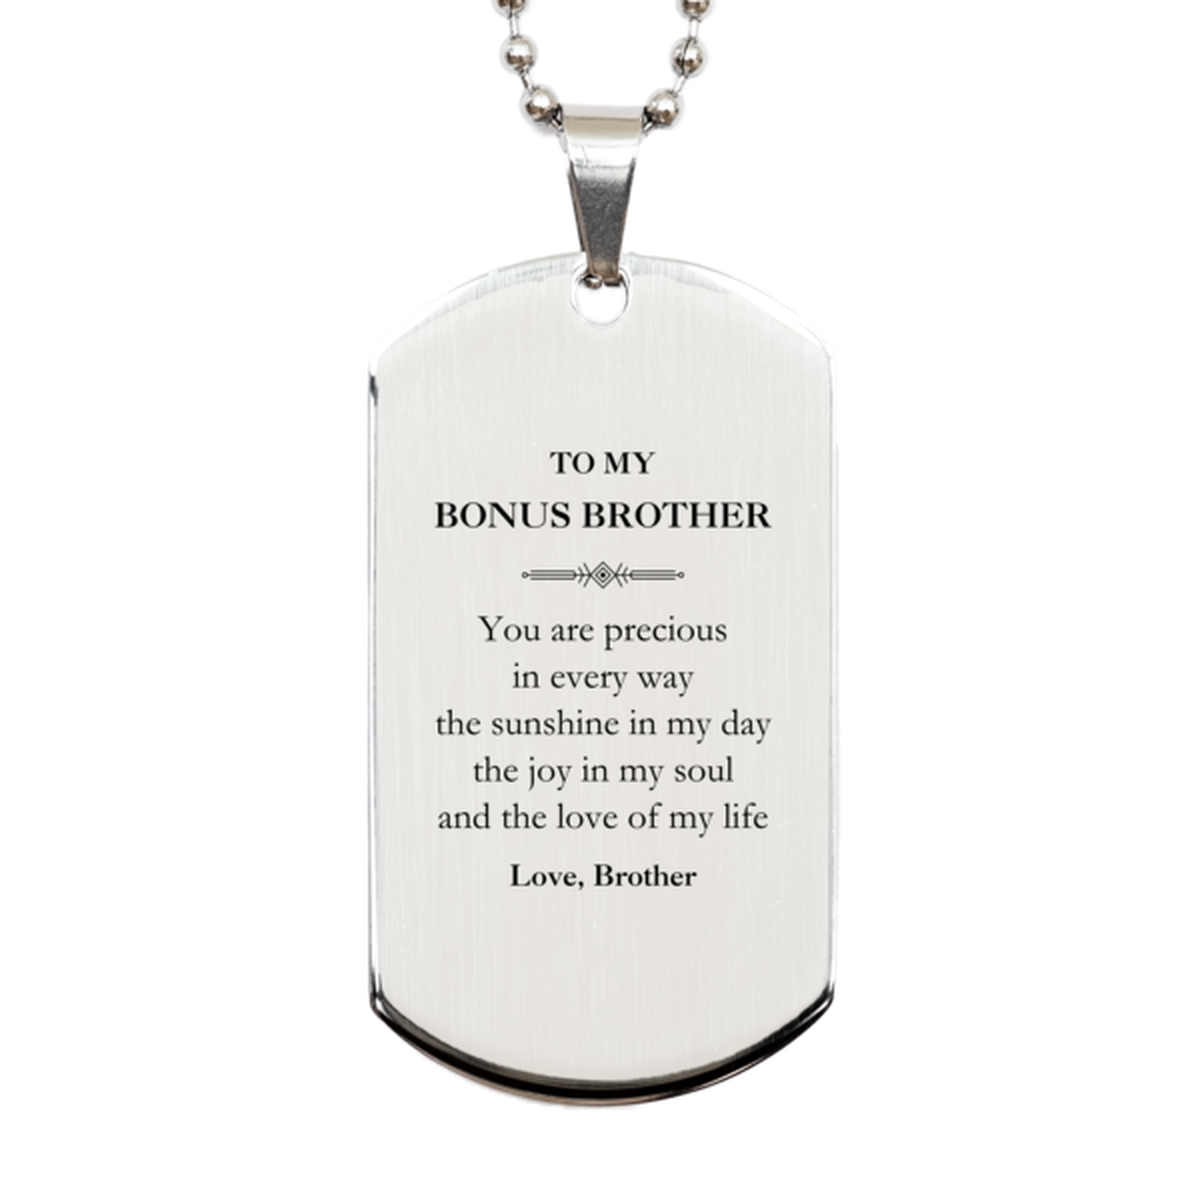 Graduation Gifts for Bonus Brother Silver Dog Tag Present from Brother, Christmas Bonus Brother Birthday Gifts Bonus Brother You are precious in every way the sunshine in my day. Love, Brother